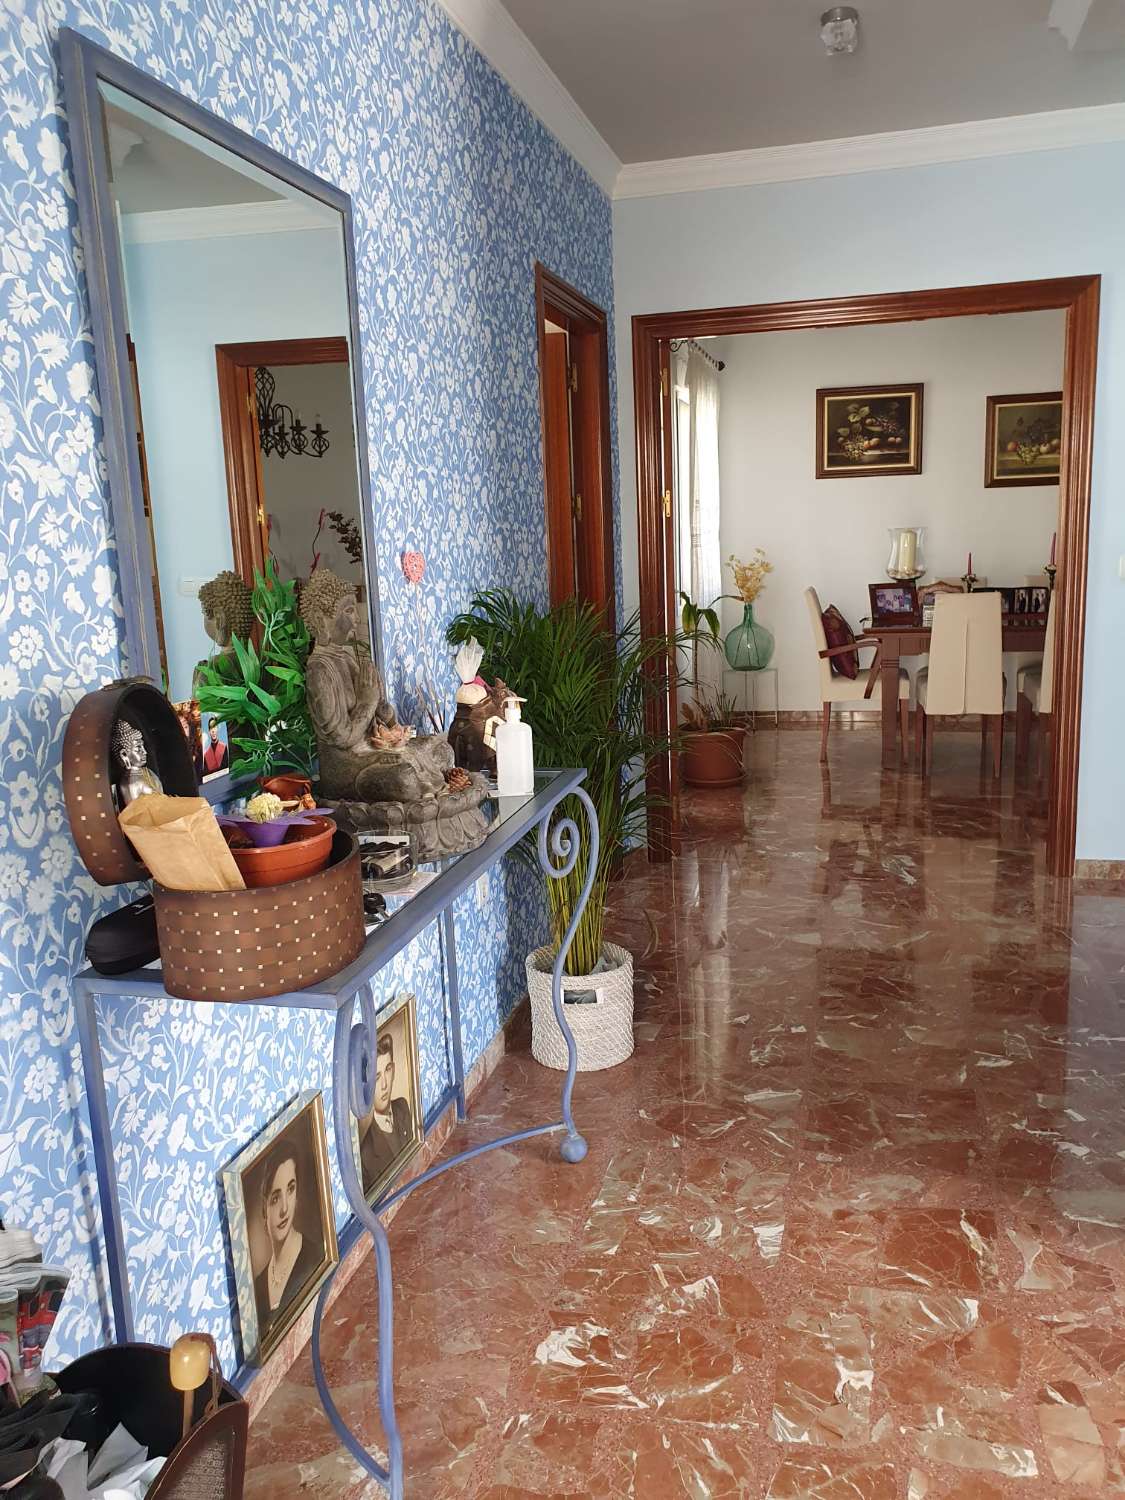 Great semi-detached house for sale in Torre del Mar.